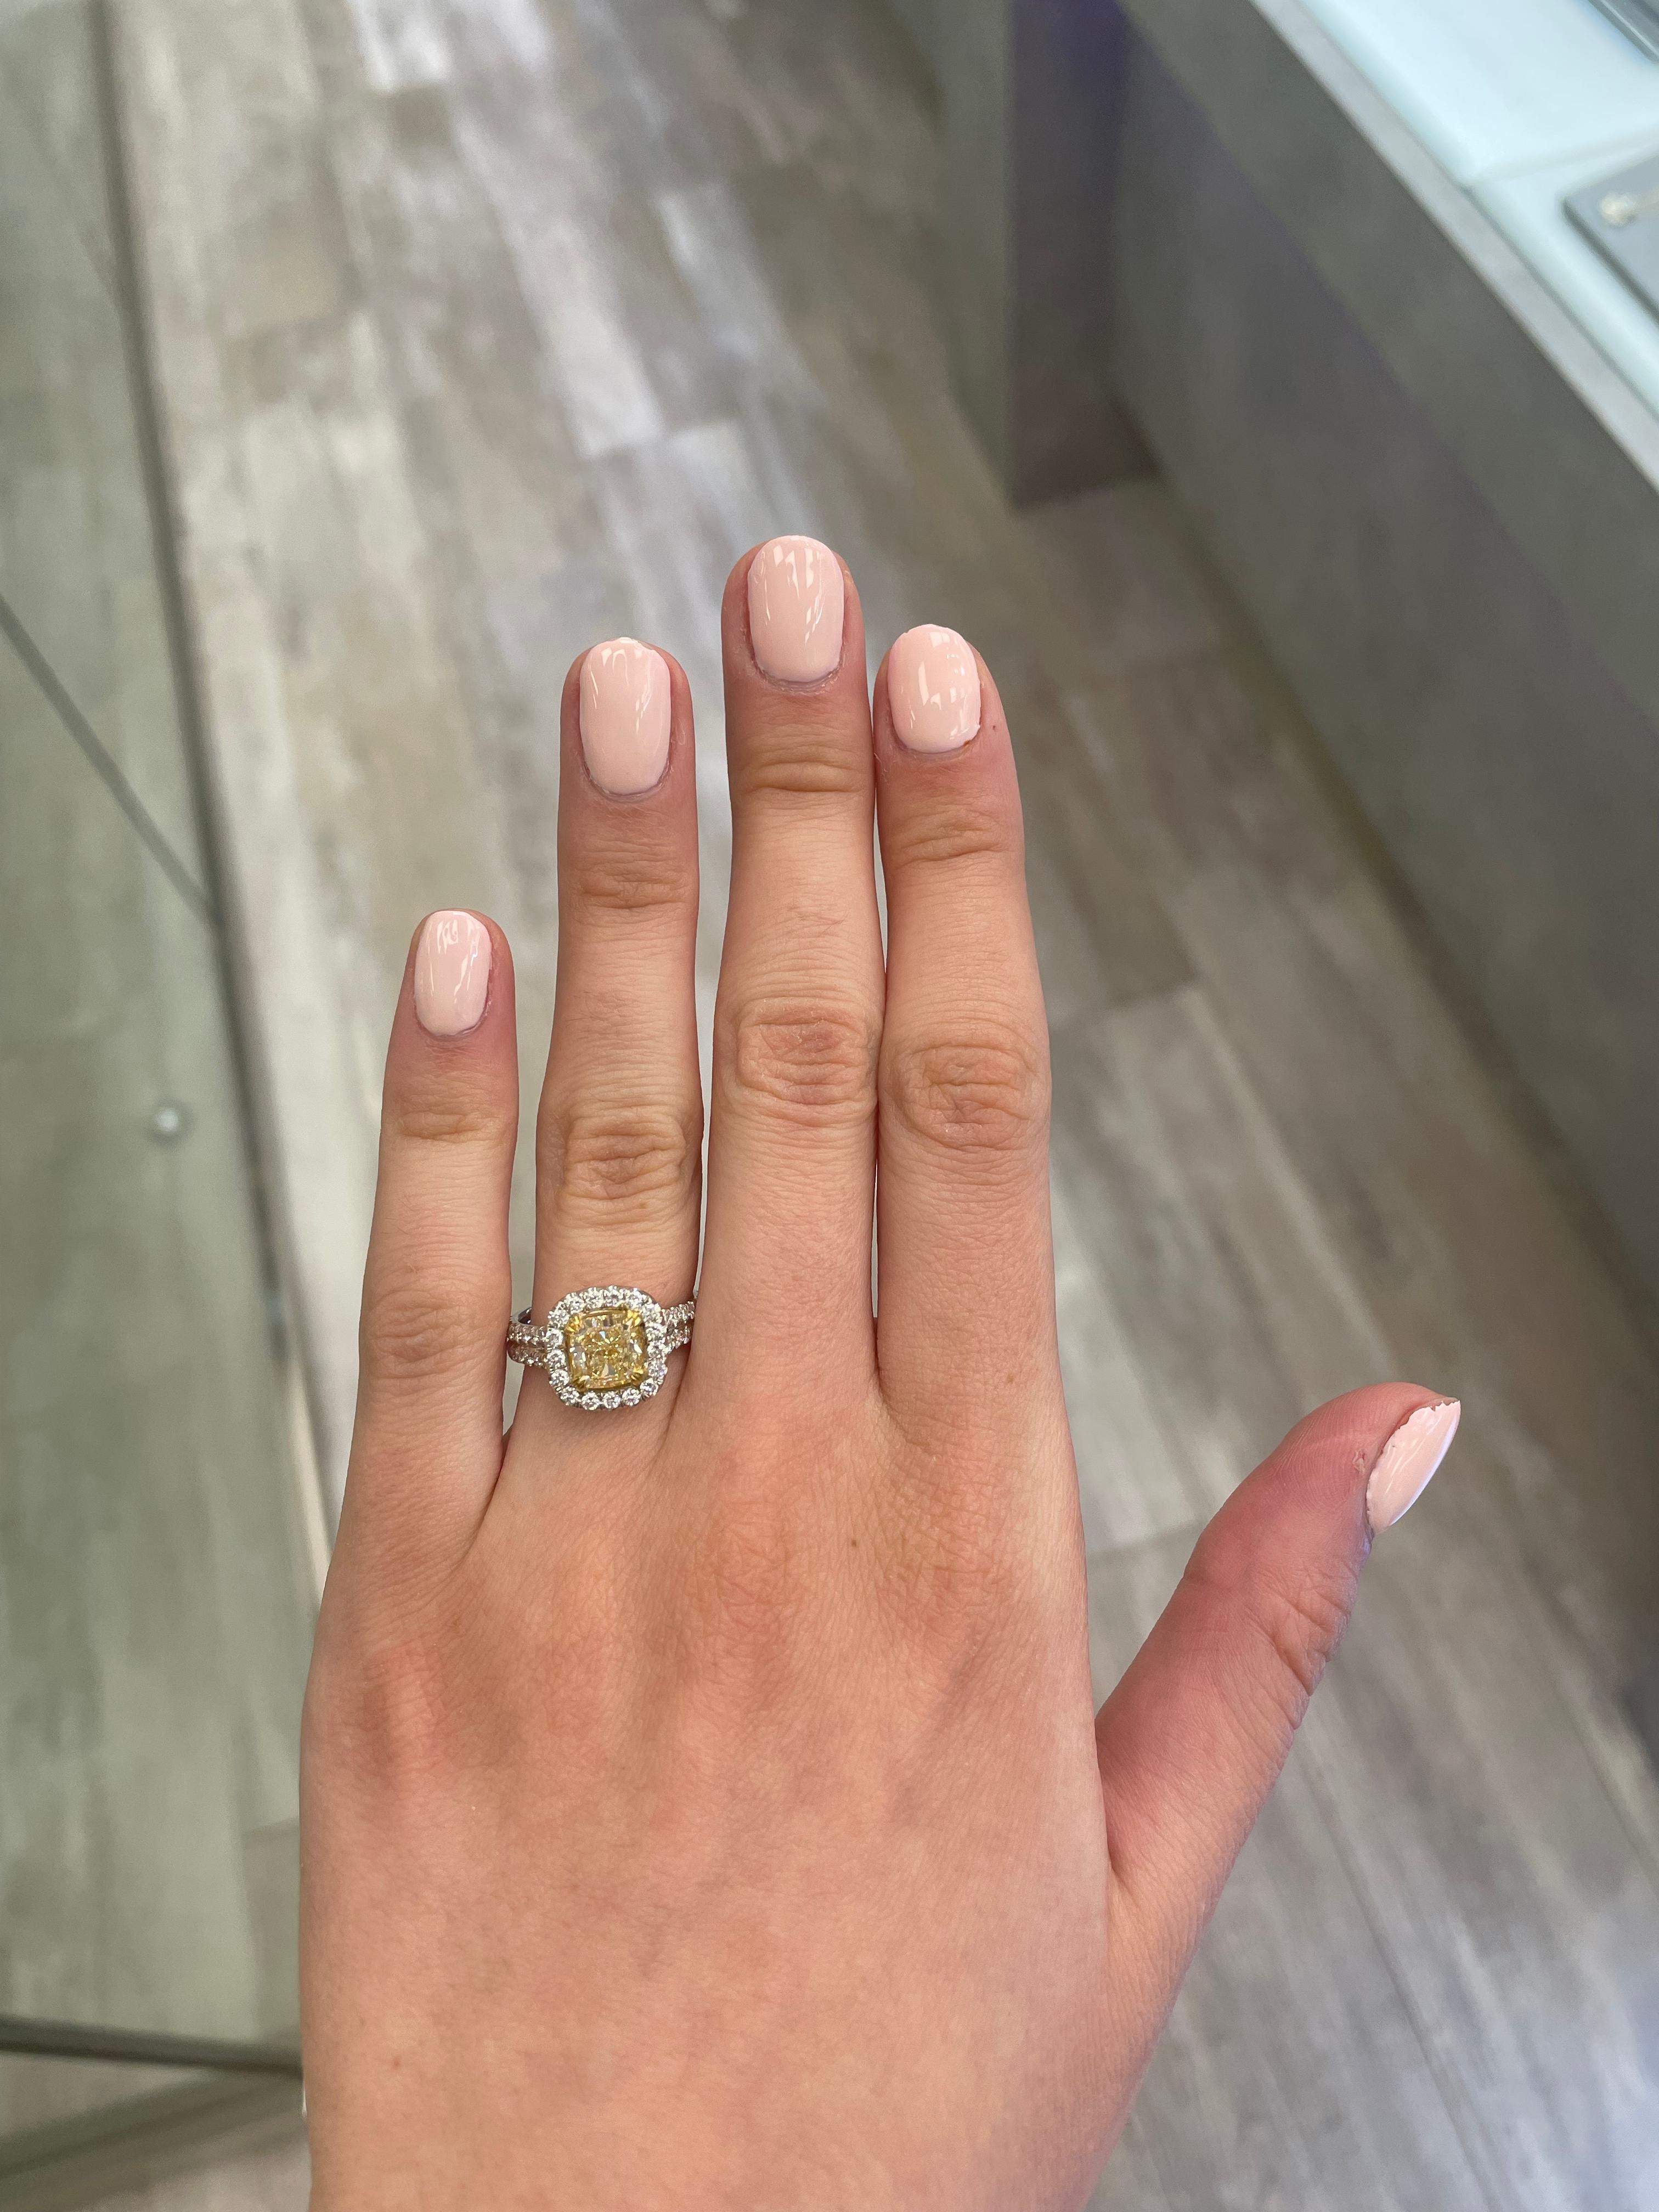 Stunning modern EGL certified yellow diamond with halo ring, two-tone 18k yellow and white gold. By Alexander Beverly Hills
2.67 carats total diamond weight.
1.60 carat cushion cut Fancy Intense Yellow color and VS1 clarity diamond, EGL graded.